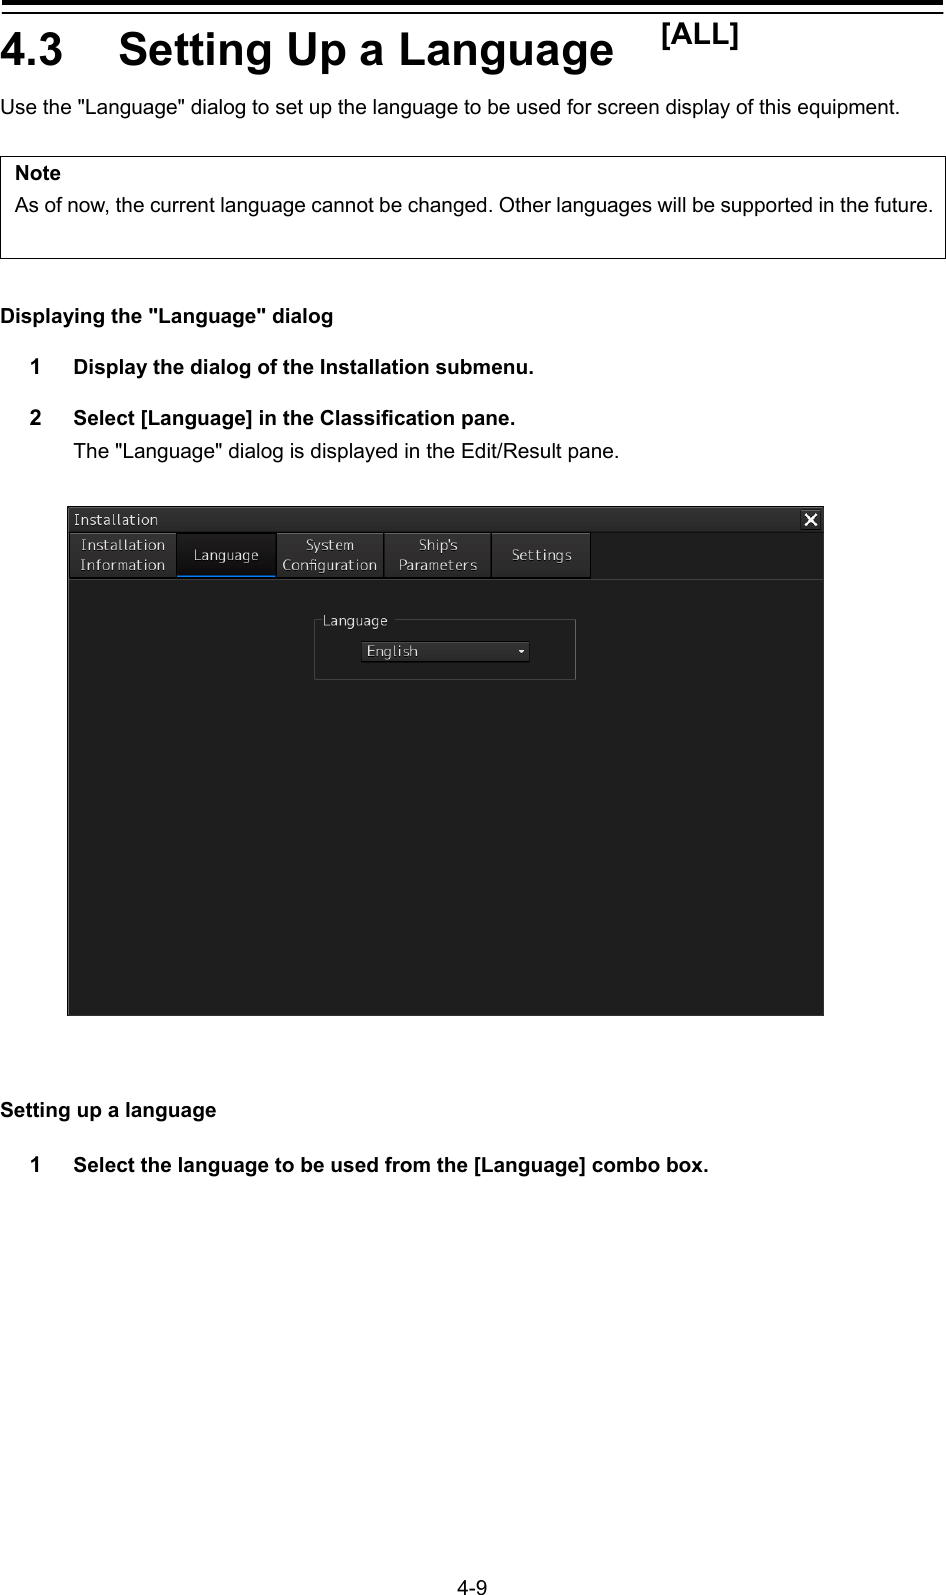   4-9 4.3  Setting Up a Language    [ALL] Use the &quot;Language&quot; dialog to set up the language to be used for screen display of this equipment.  Note As of now, the current language cannot be changed. Other languages will be supported in the future. Displaying the &quot;Language&quot; dialog 1  Display the dialog of the Installation submenu. 2  Select [Language] in the Classification pane. The &quot;Language&quot; dialog is displayed in the Edit/Result pane.     Setting up a language 1  Select the language to be used from the [Language] combo box.  